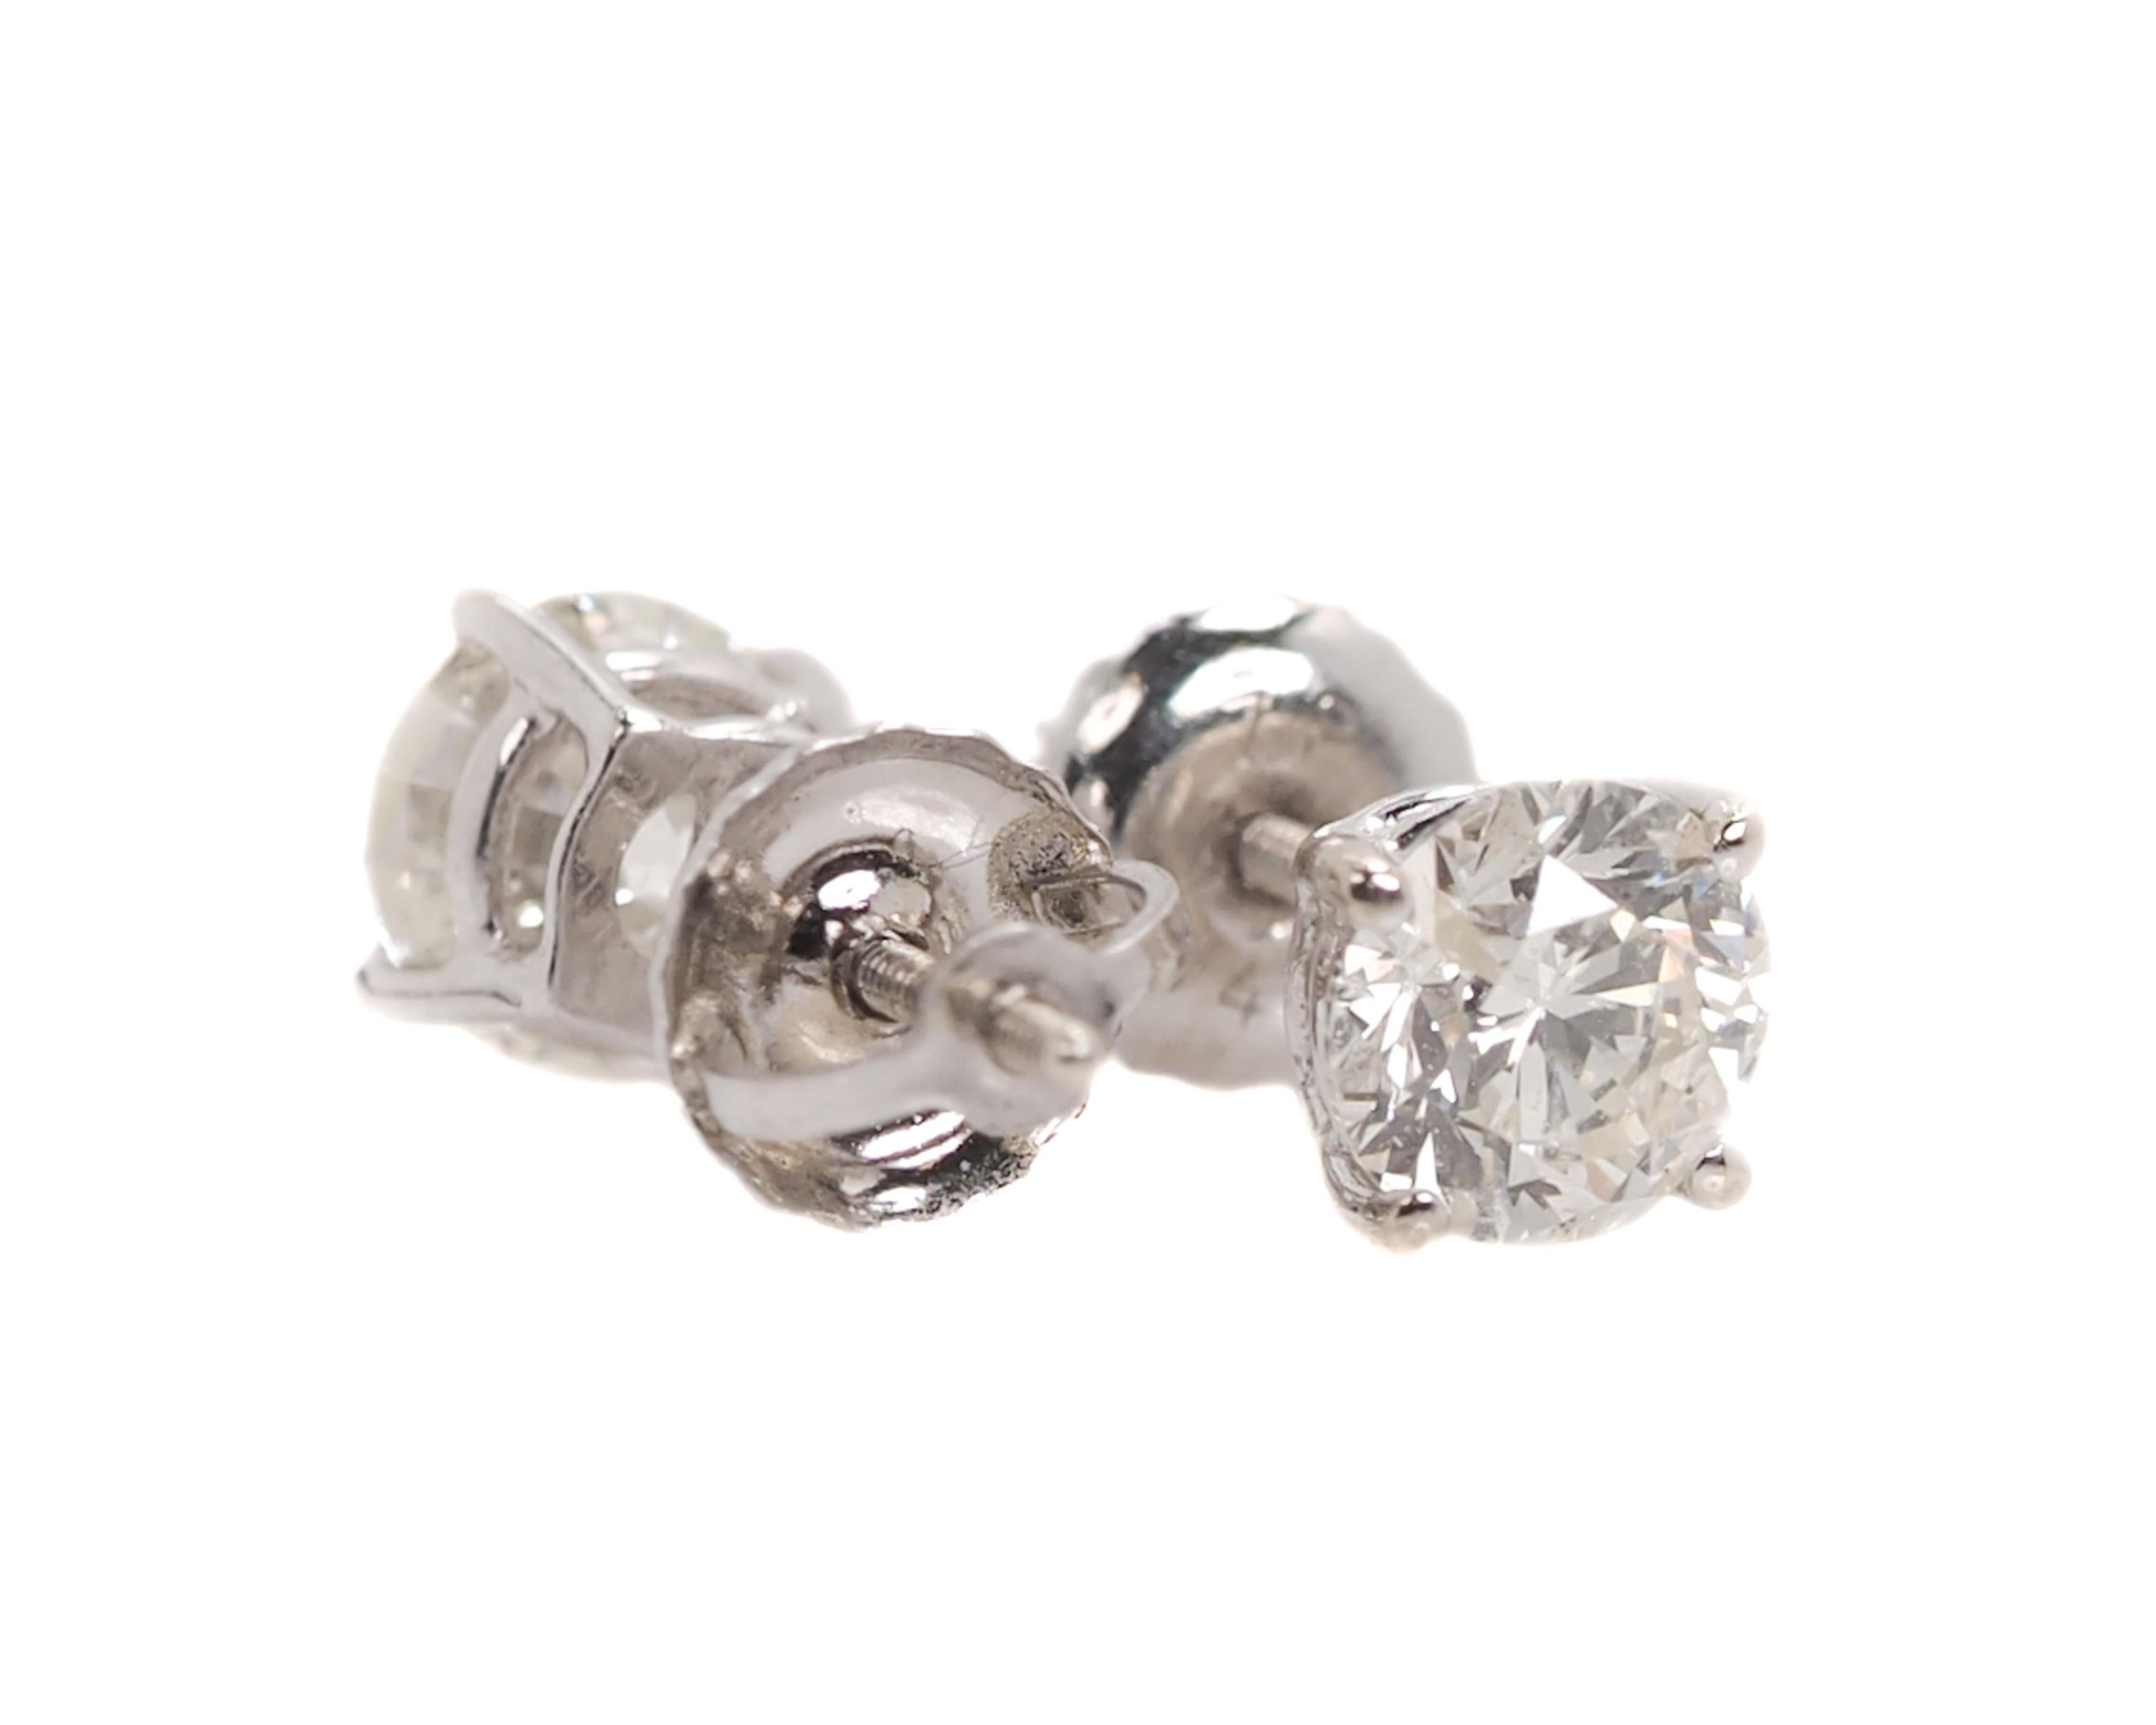 Made in-house, these screw back Diamond Stud Earrings are brand new. 
Each earring features a 0.5 carat Round Brilliant Diamond, totaling 1 Carat. 

The Diamonds are securely set in a 4-prong 14k White Gold frame. 
A simple gallery underneath